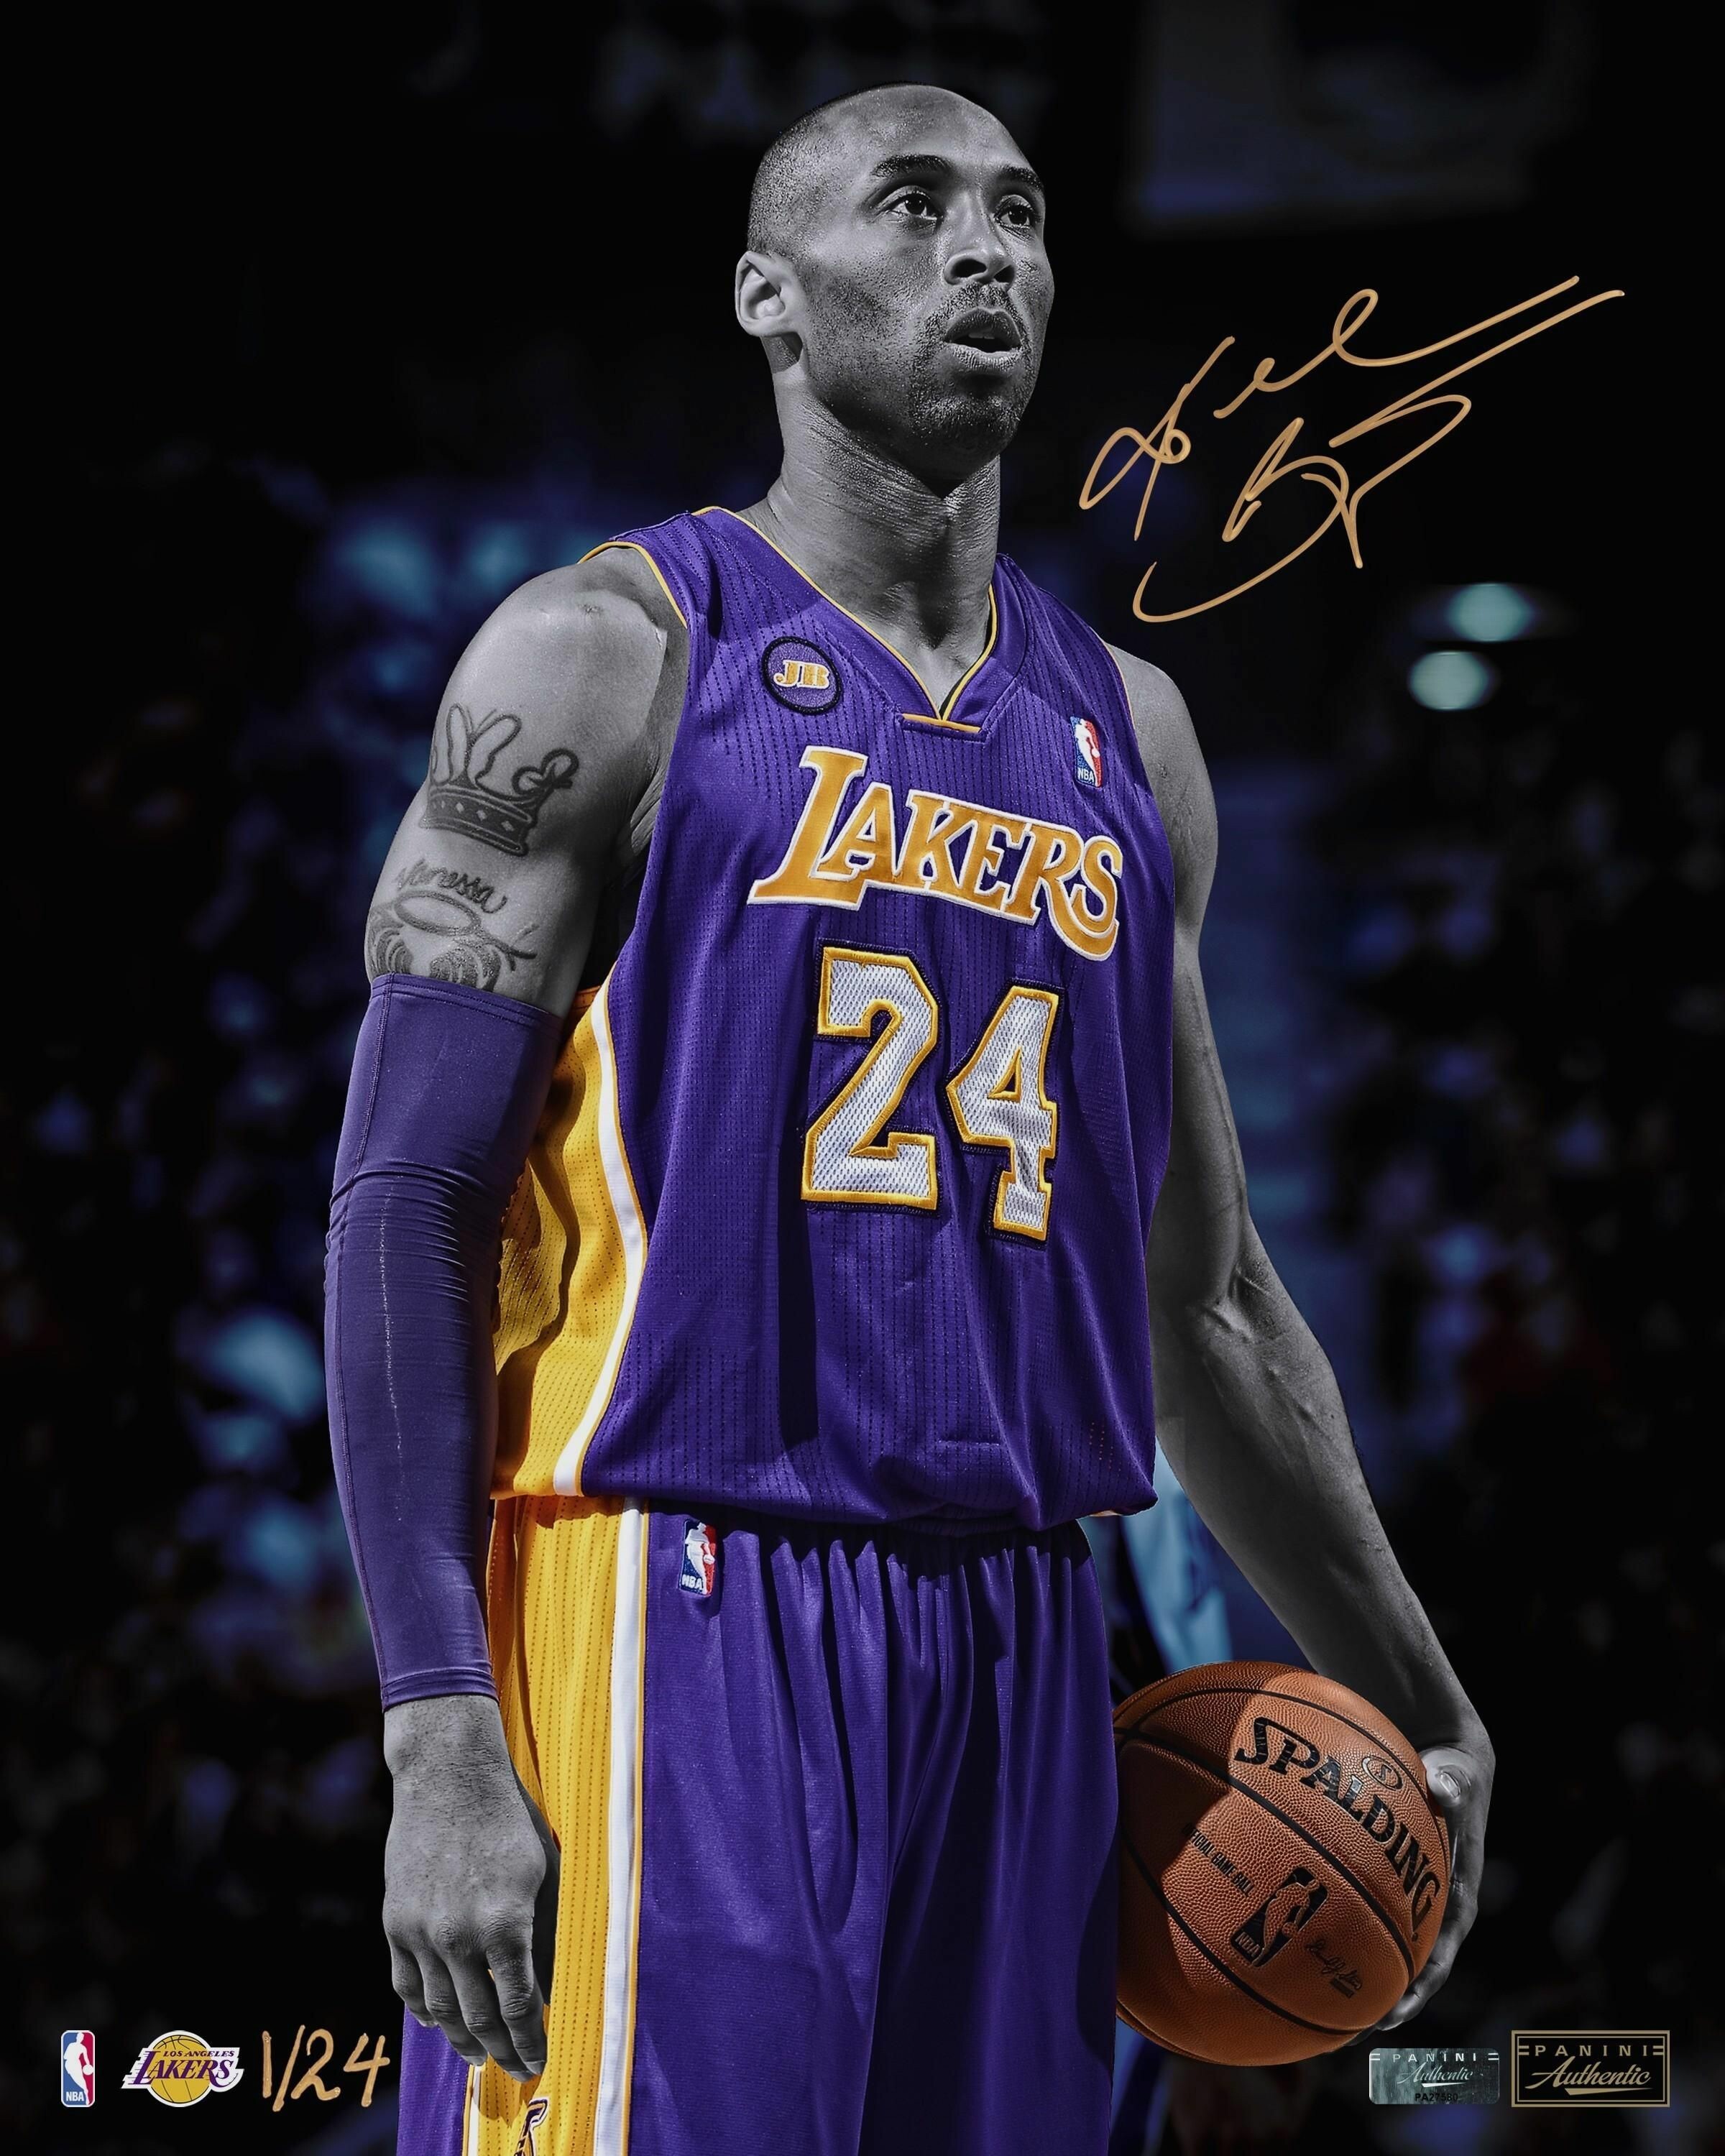 Kobe Bryant Wallpaper: HD, 4K, 5K for PC and Mobile. Download free image for iPhone, Android